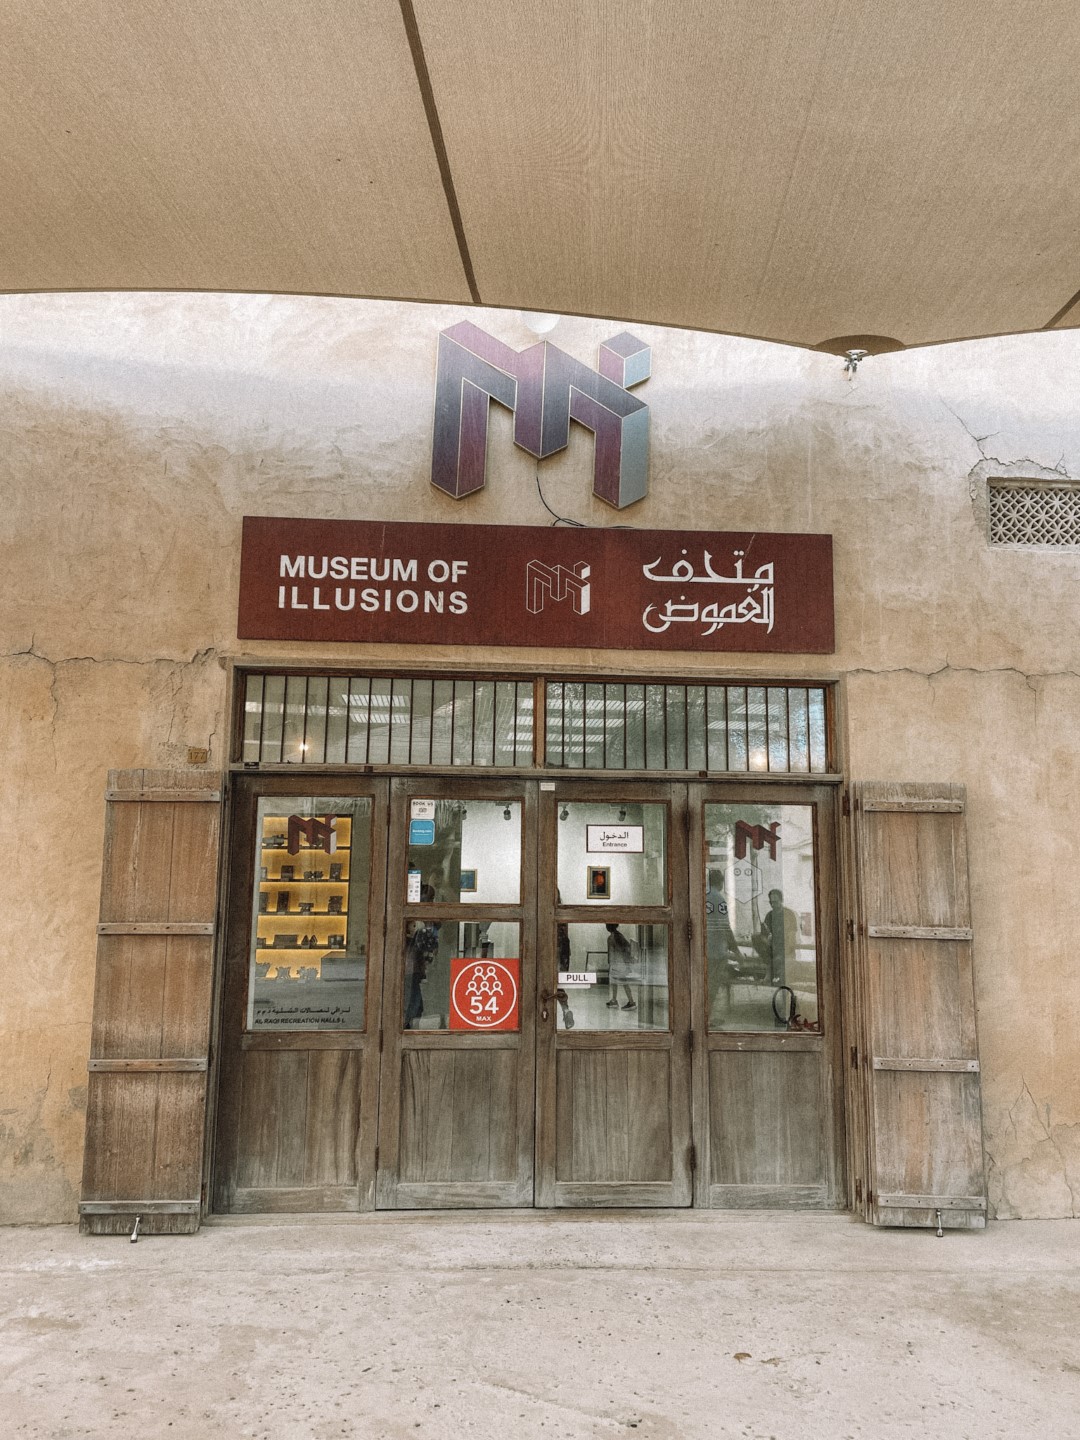 Entrance to the Museum of Illusions in Al Seef, Dubai